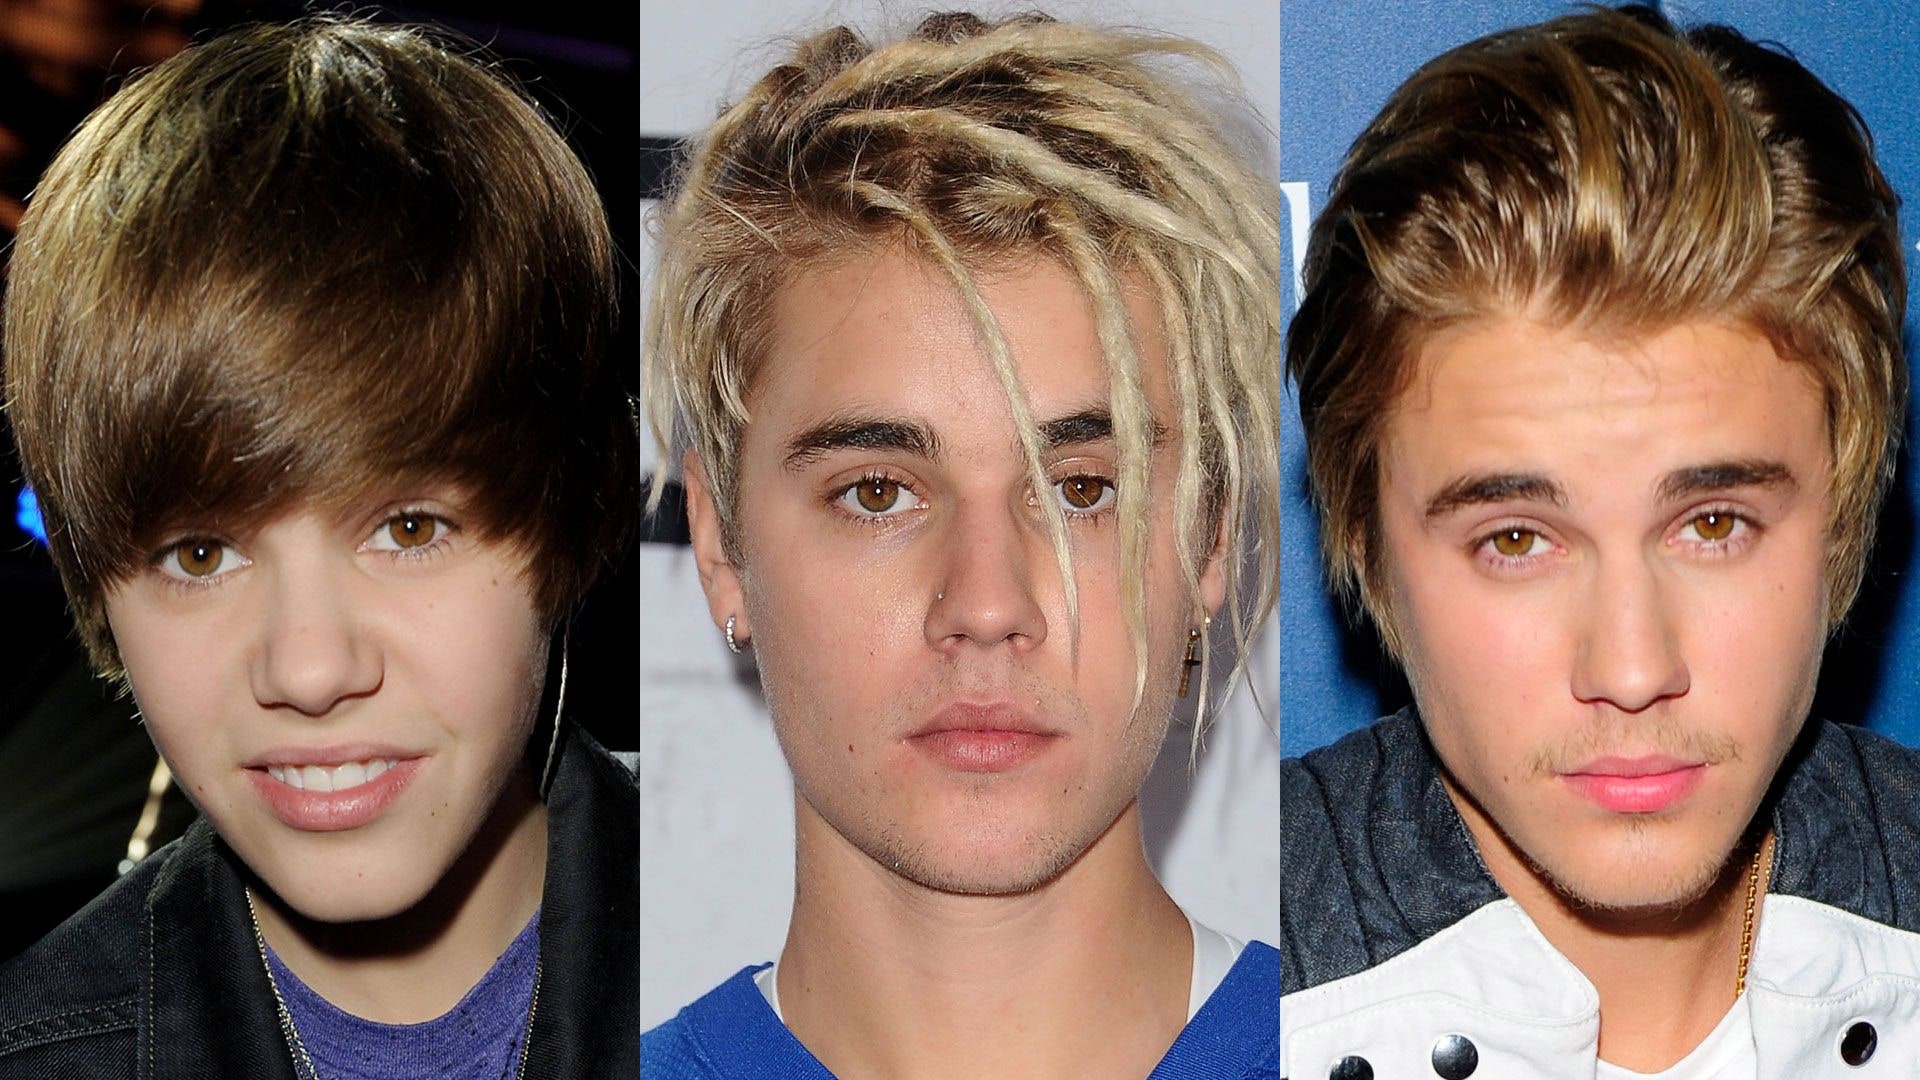 Justin Bieber Hairstyle: Top 7 Iconic Hairstyles 